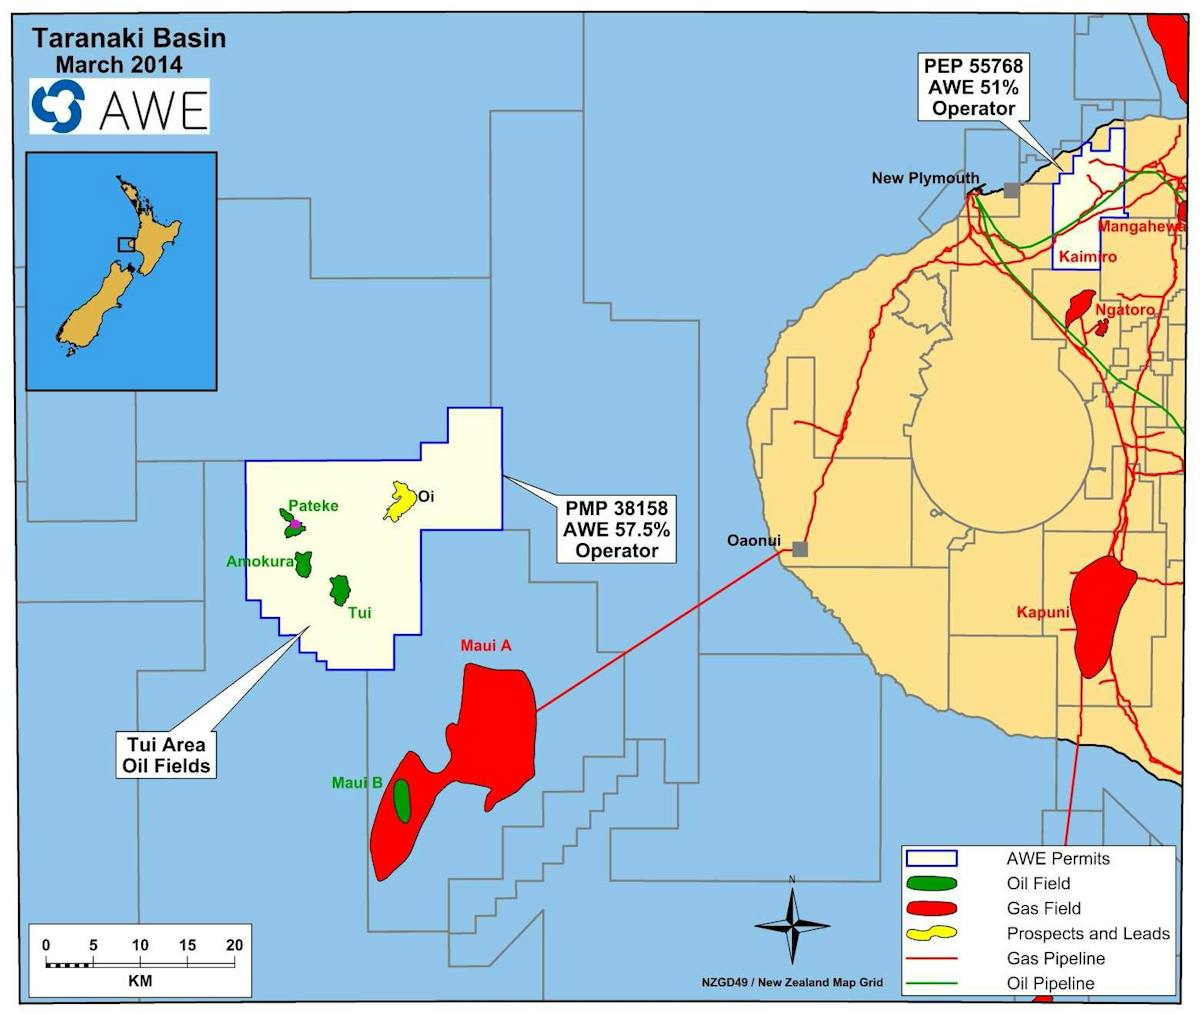 The Pateke-4H well is located in the Taranaki basin offshore New Zealand.